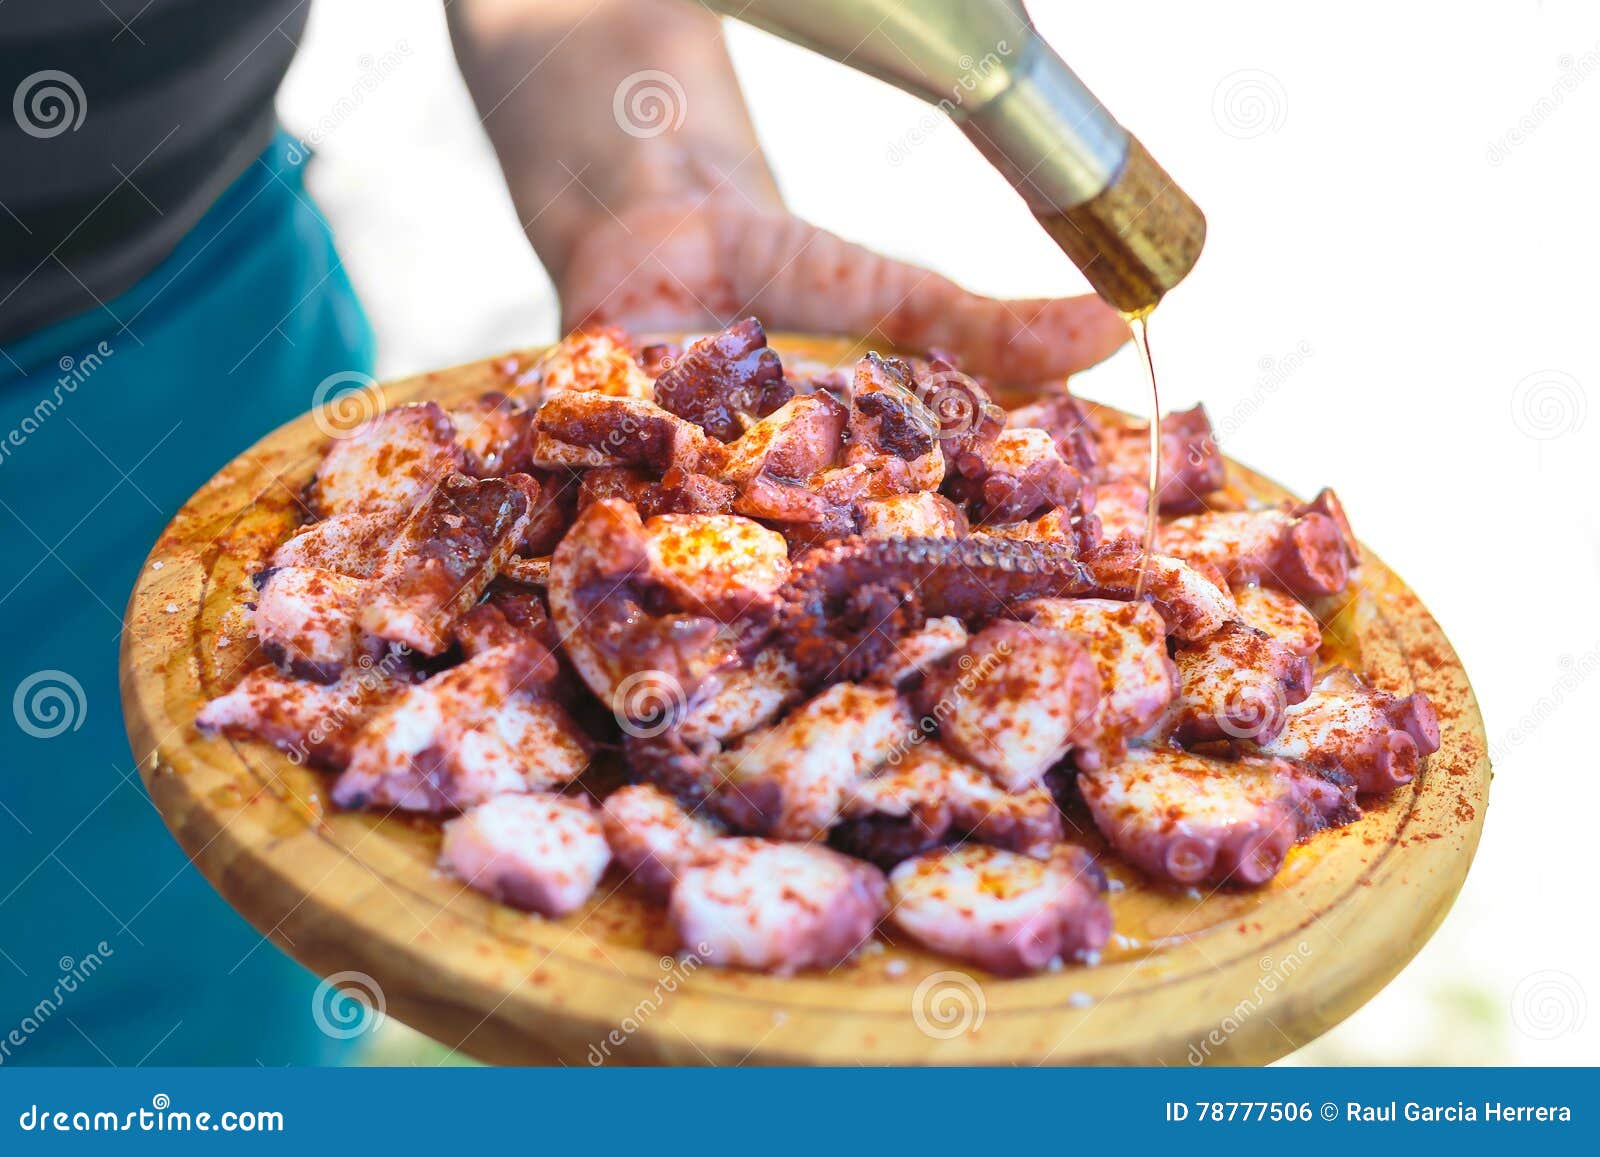 galician style cooked octopus with paprika and olive oil.